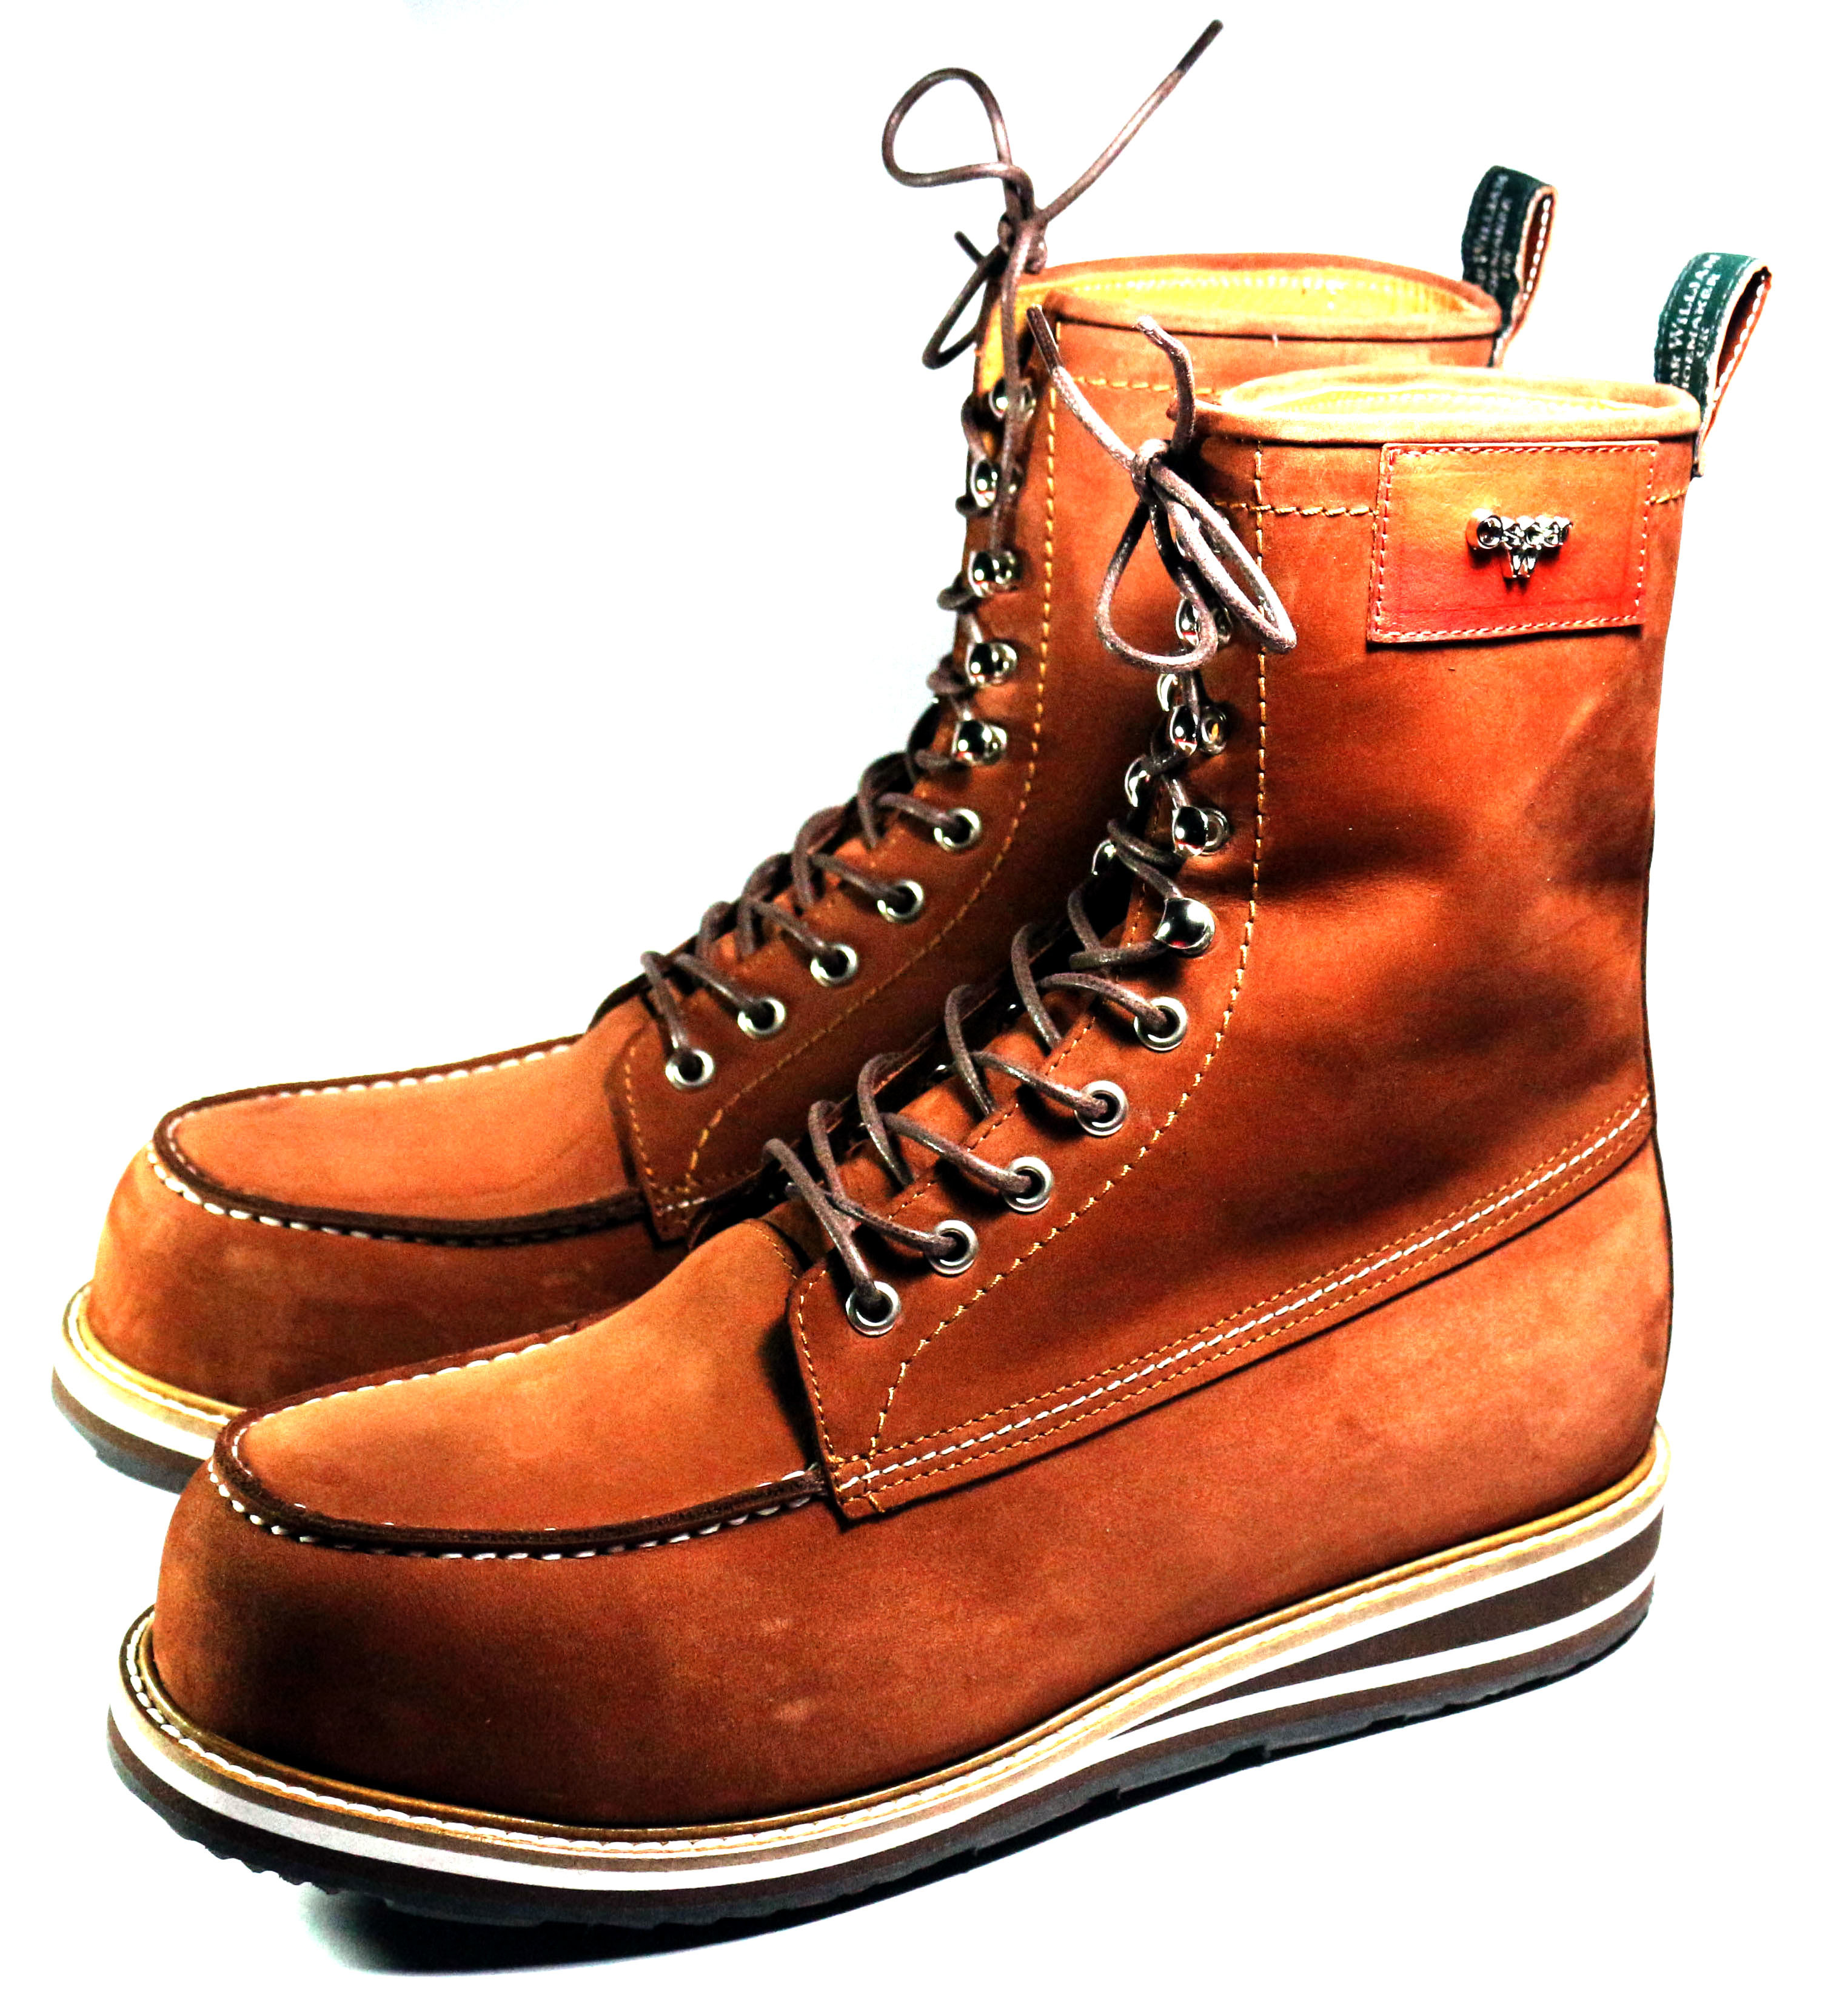 New Luxury Handmade Moc Toe Boots (Alfie) Made to Order